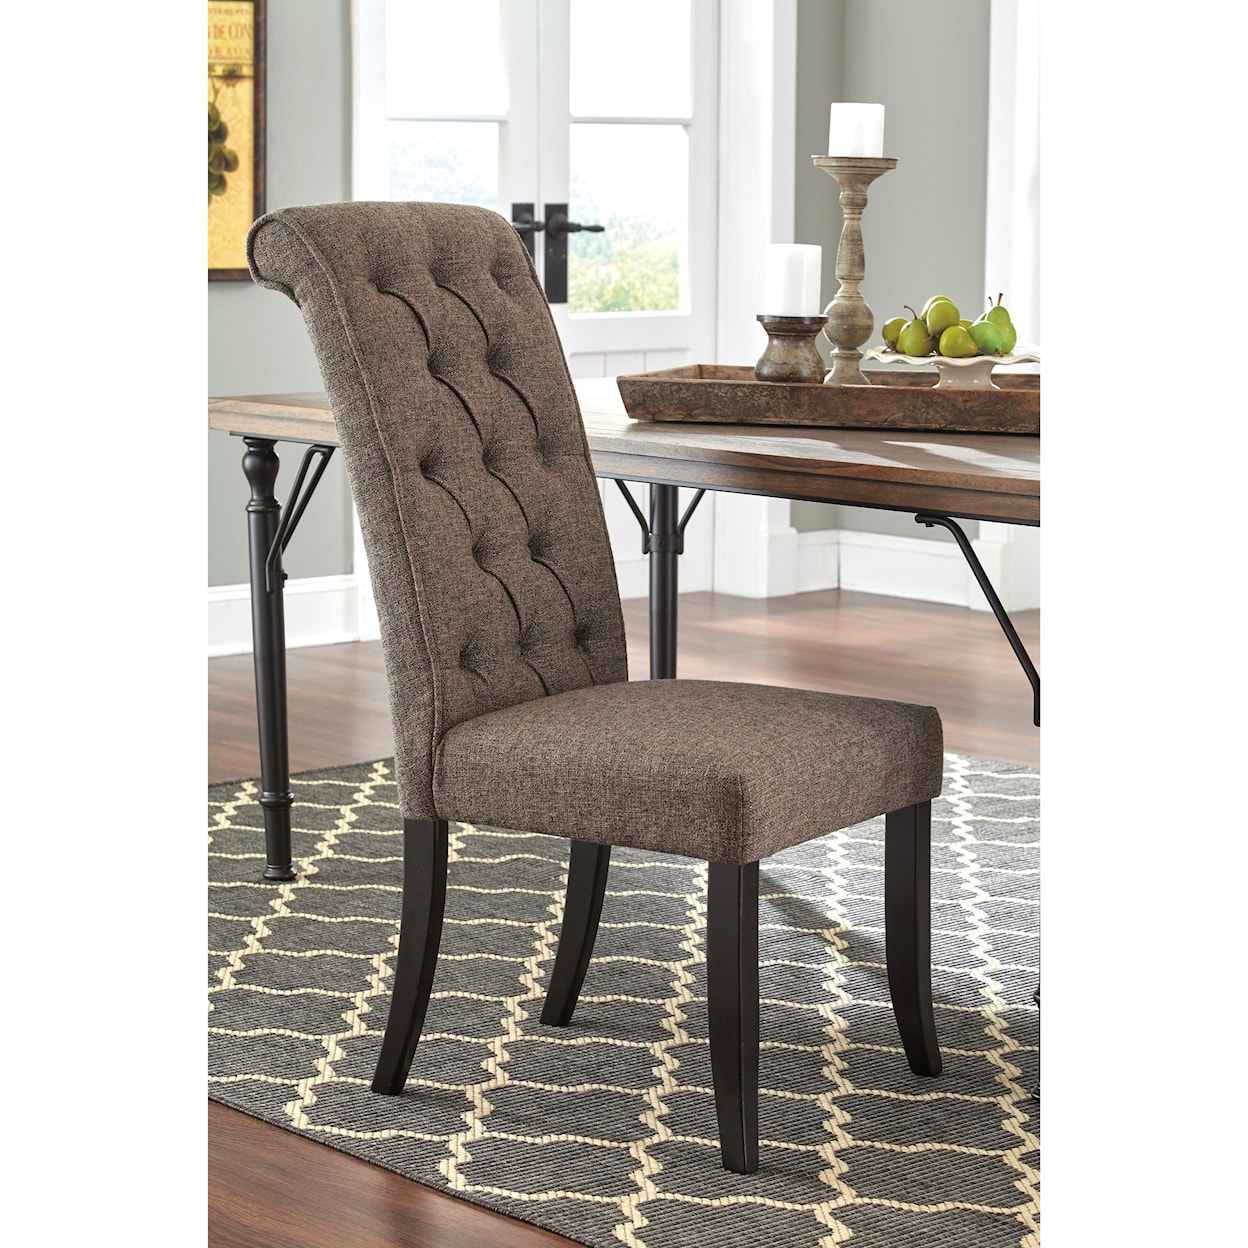 Signature Design by Ashley Tripton Dining Upholstered Side Chair